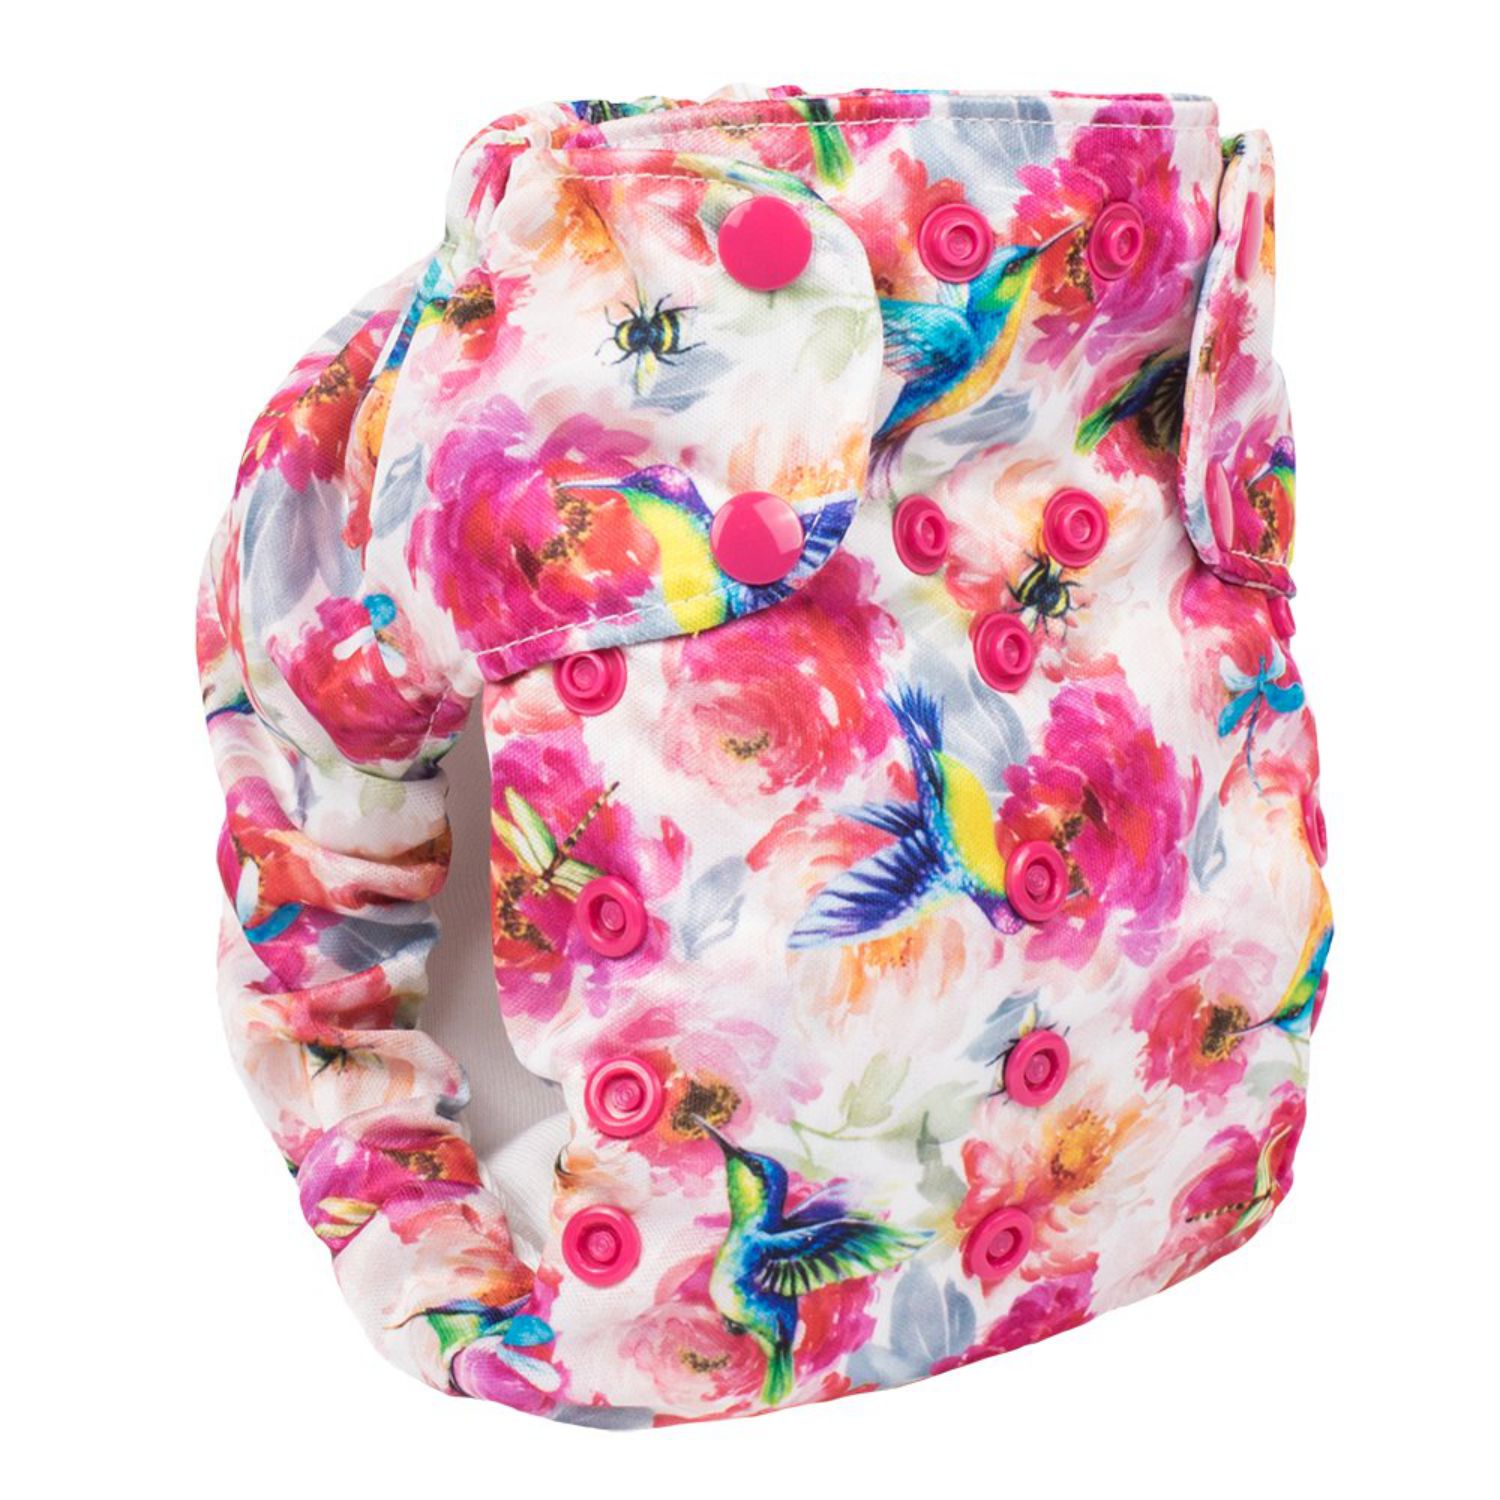 Smart Bottoms Dream Diaper 2.0 AIO One Size Pattern: Shimmer